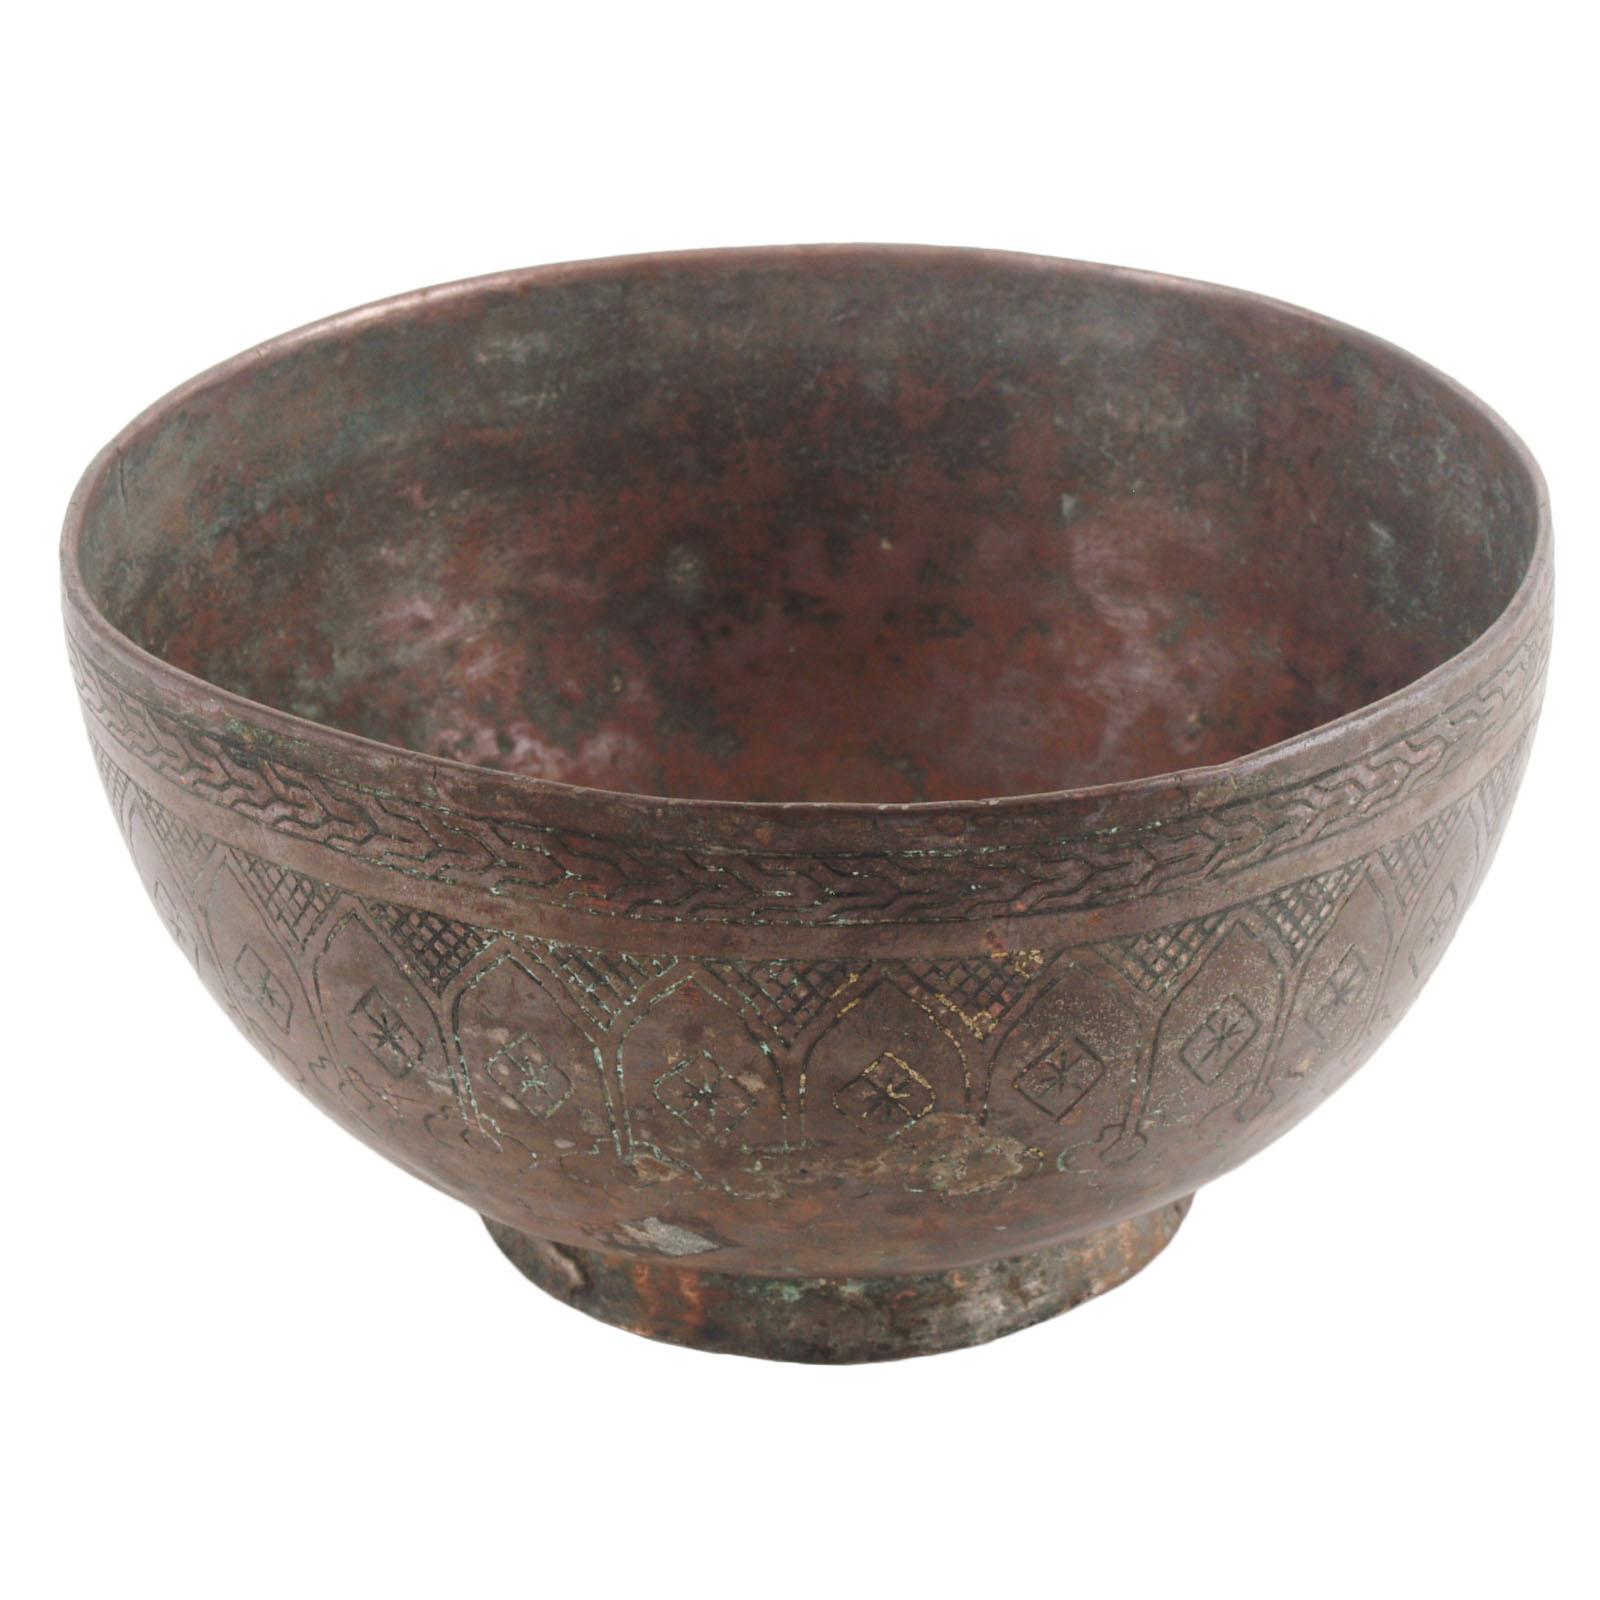 Hand-Crafted 17th Century Heavy Copper Bowls with Ladle Covered with Tin, Handmade